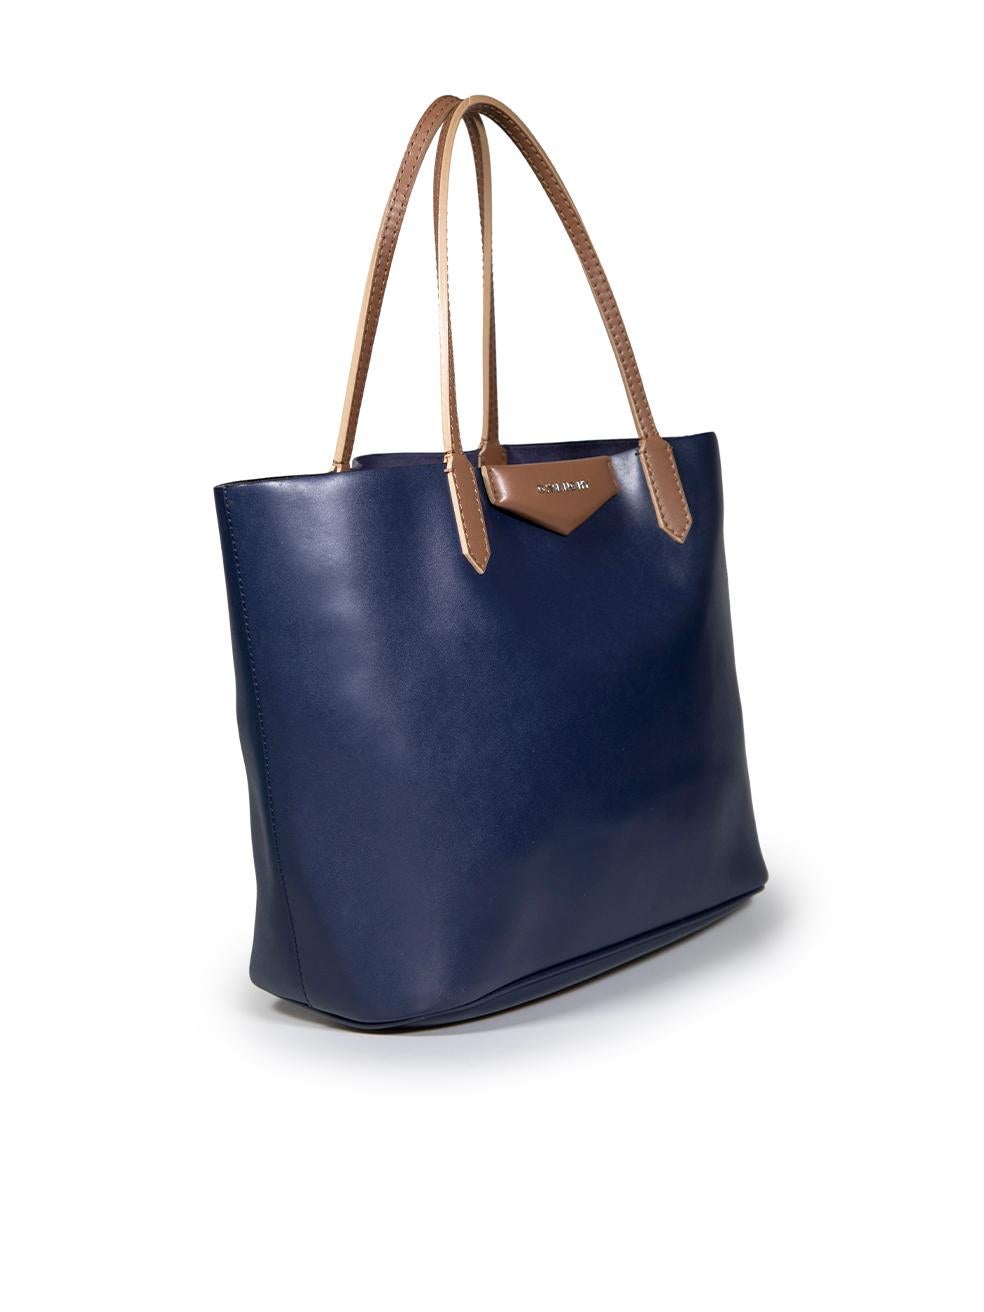 CONDITION is Very good. Minimal wear to bag is evident. Minimal wear to base, with some small marks and scratches on this used Givenchy designer resale item.
 
 Details
 GV Shopper model
 Navy
 Leather
 Large tote bag
 2x Brown leather top handles
